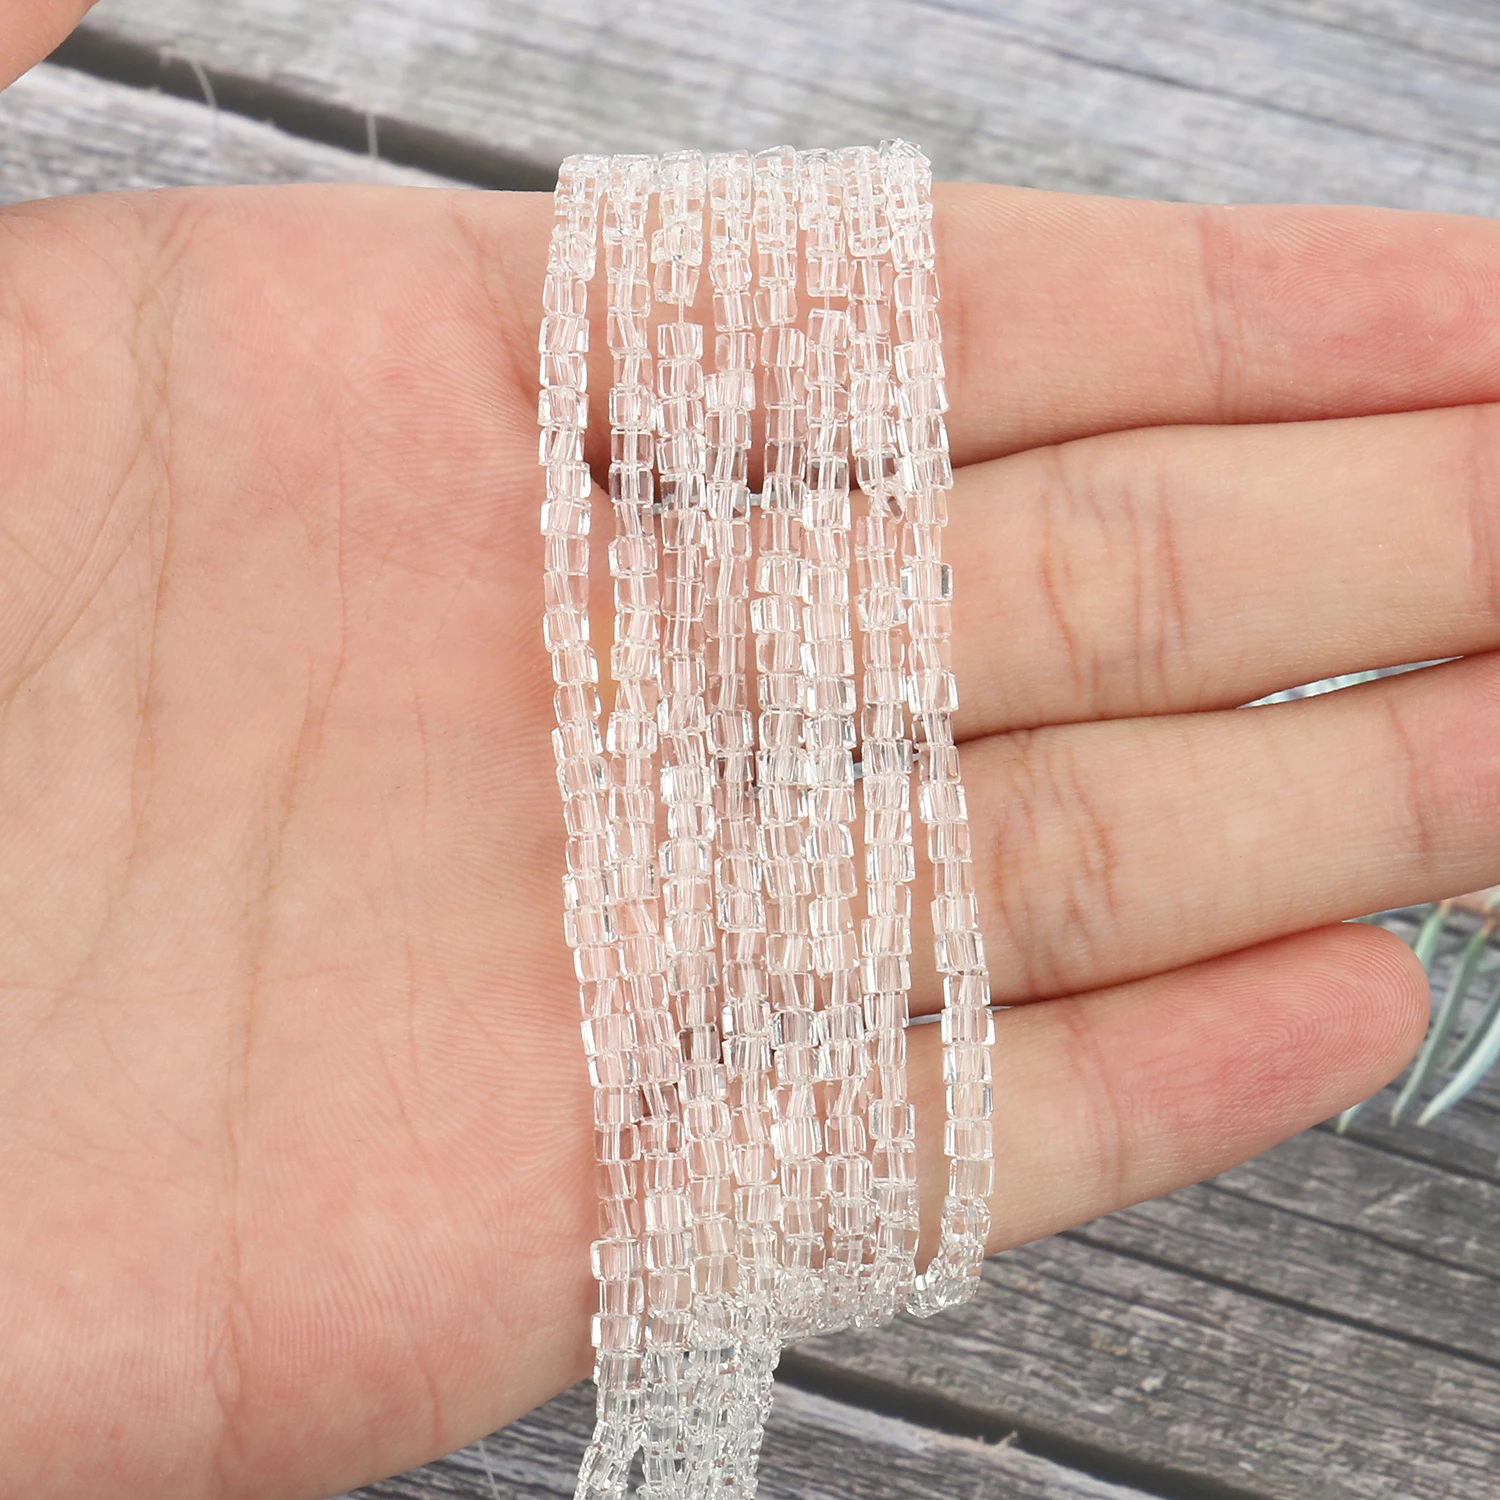 

Cube Square Austrian Crystal Glass Beads Faceted Clear Loose Spacer Beads for Jewelry Making DIY Crafts Bracelet Charms 2 3 4mm